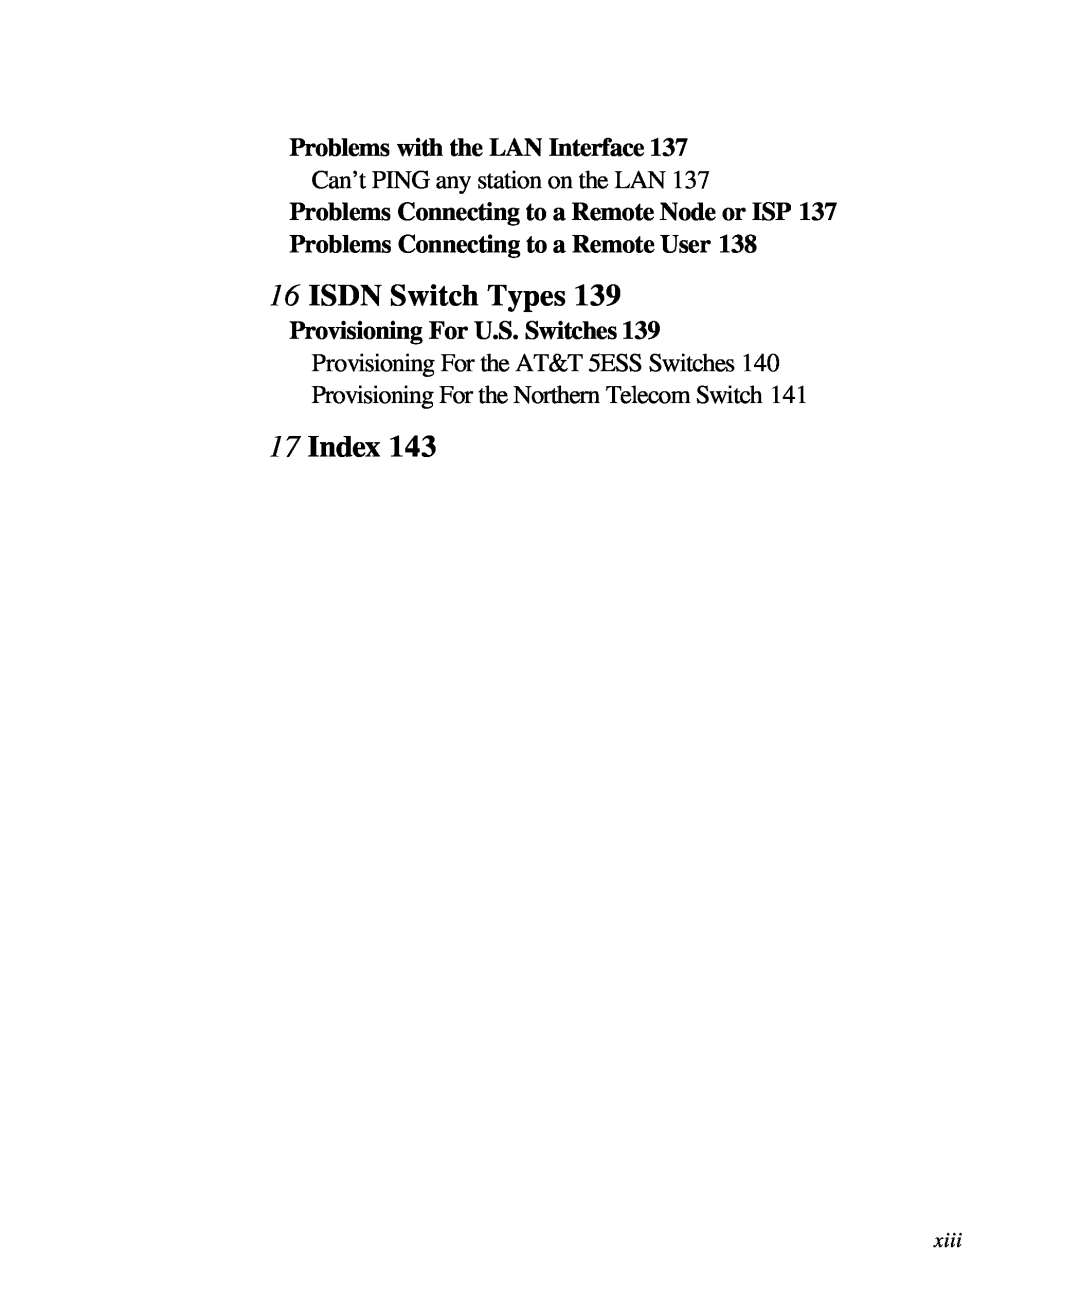 ZyXEL Communications 28641 ISDN Switch Types, Index, Problems with the LAN Interface, Provisioning For U.S. Switches, xiii 